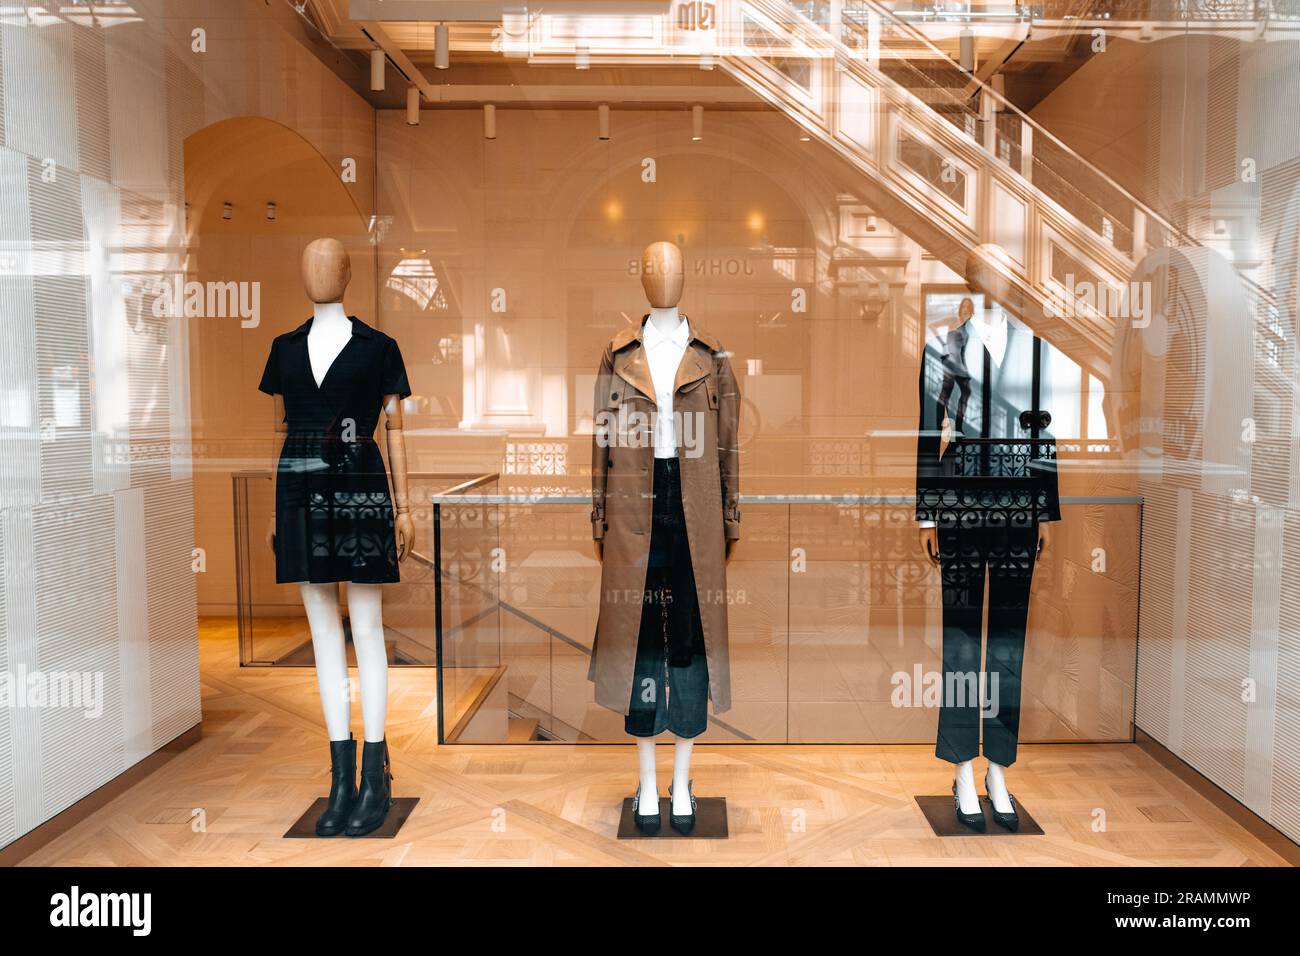 Mannequins dressed in a stylish fashionable autumn winter collection. Long brown coat, black dress, classy costume Stock Photo